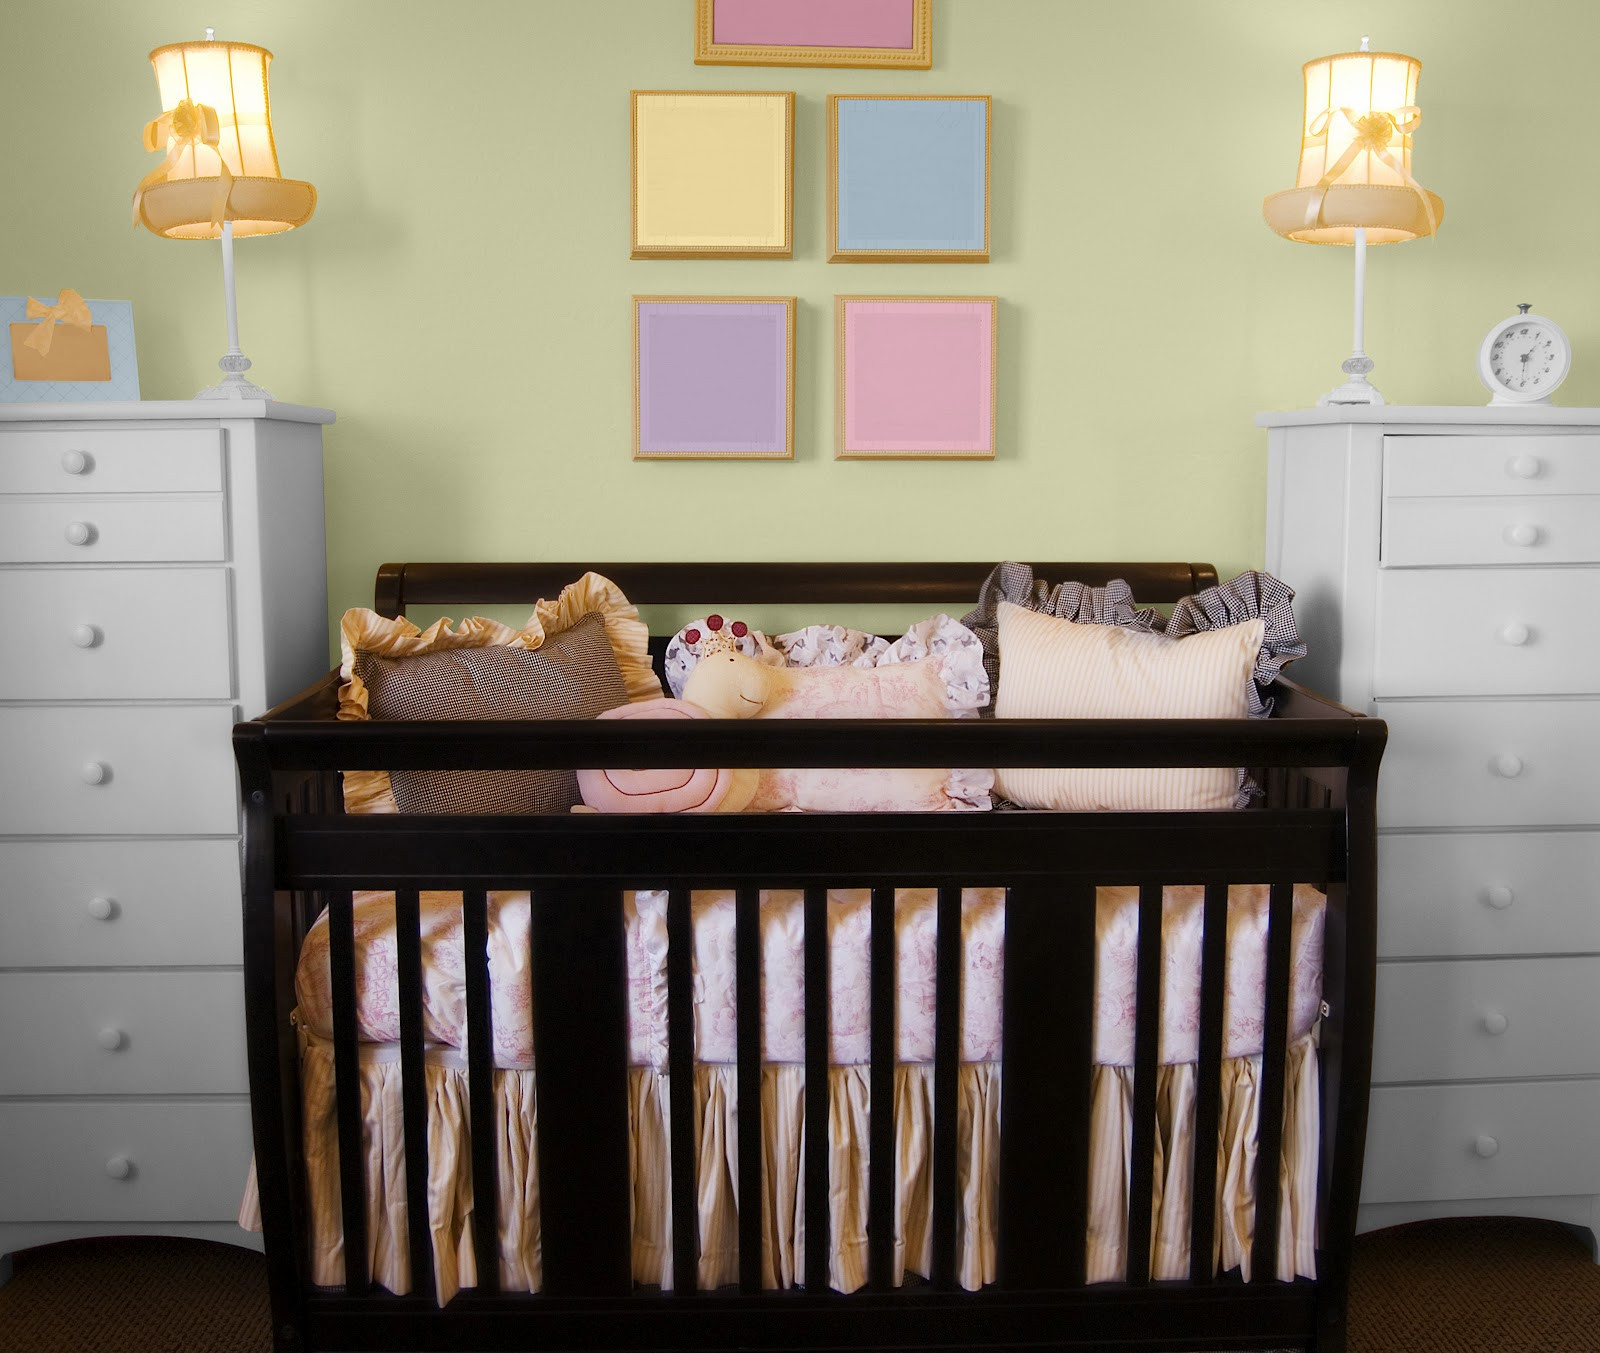 Baby Decor Rooms
 Top 10 Baby Nursery Room Colors And Decorating Ideas